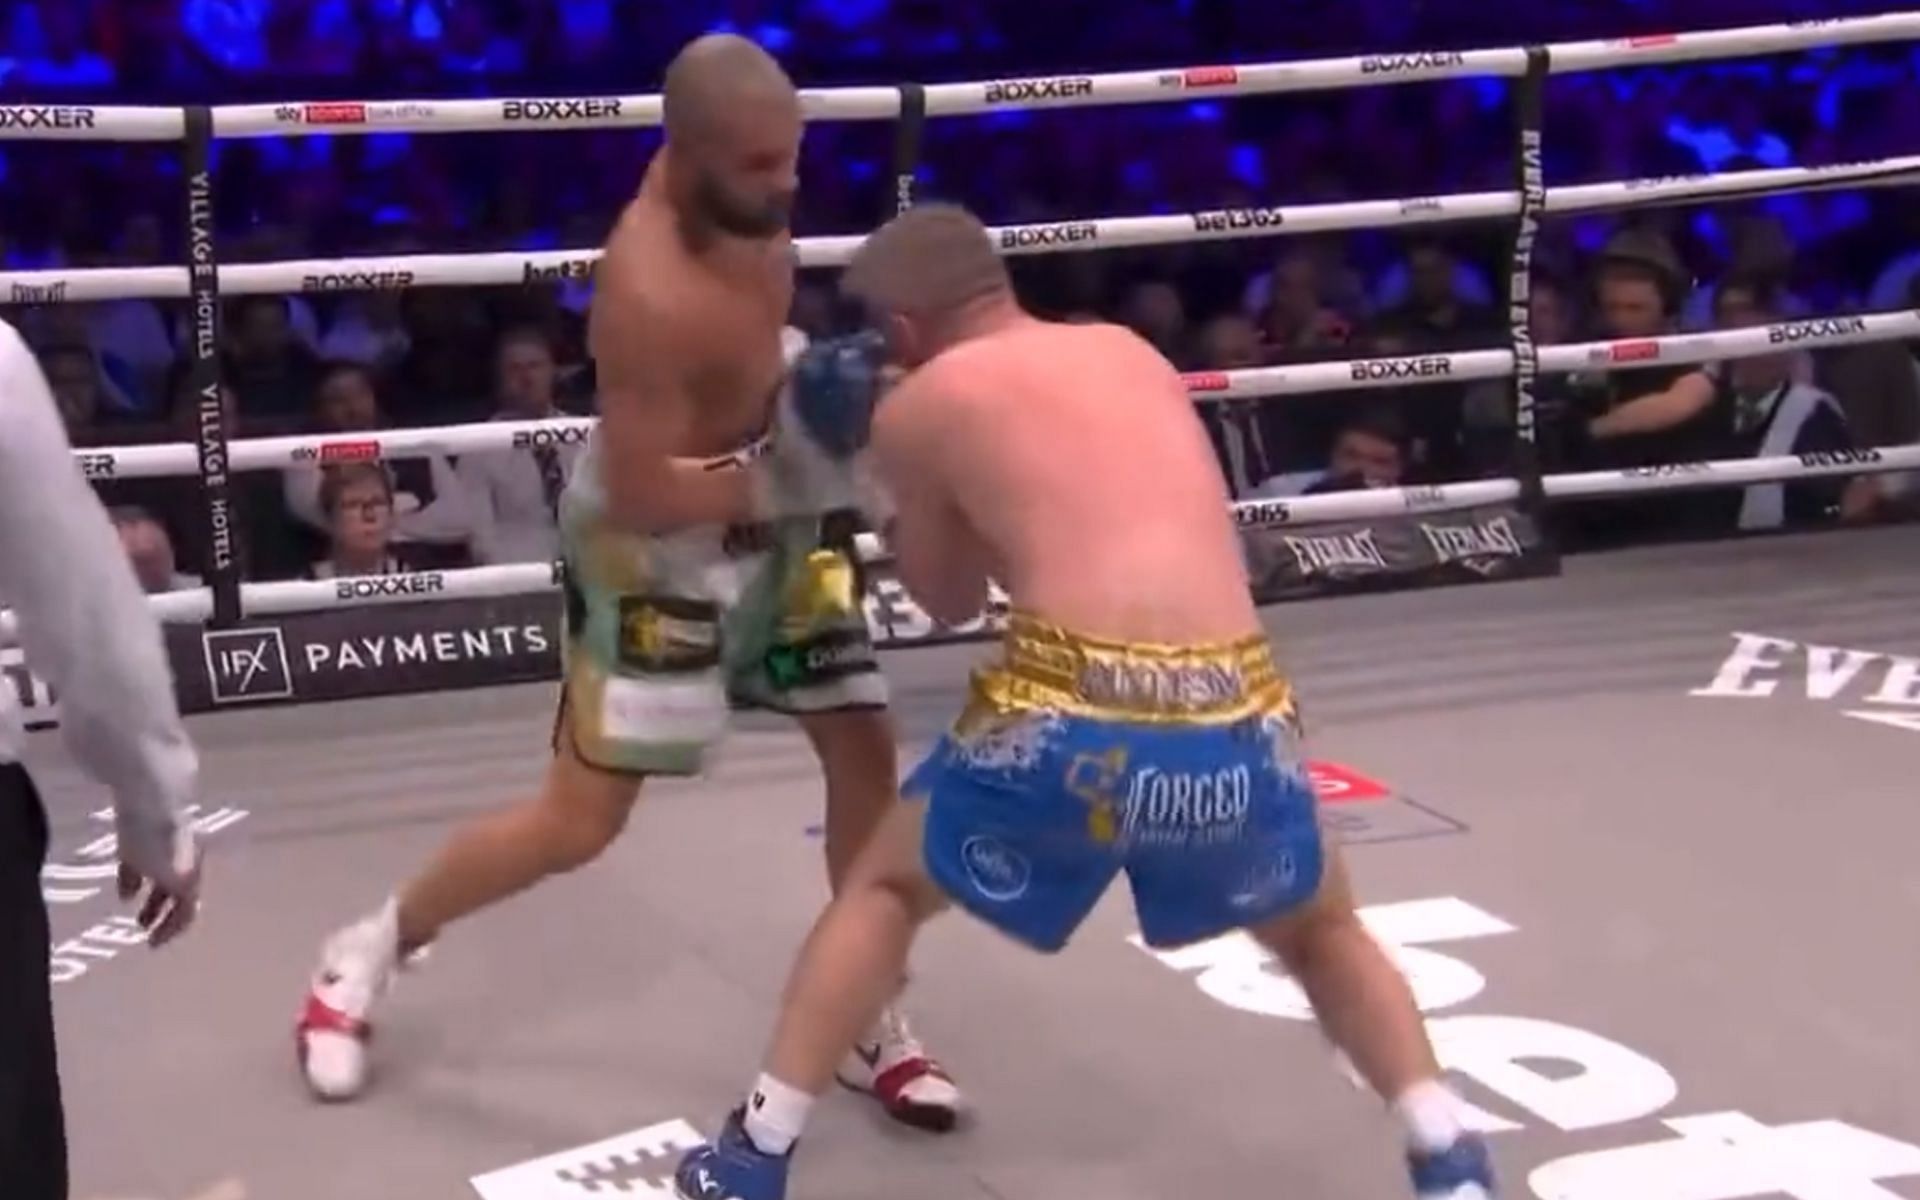 Chris Eubank Jr. Stops Liam Smith In 10th Round TKO - Boxing Results -  Boxing News